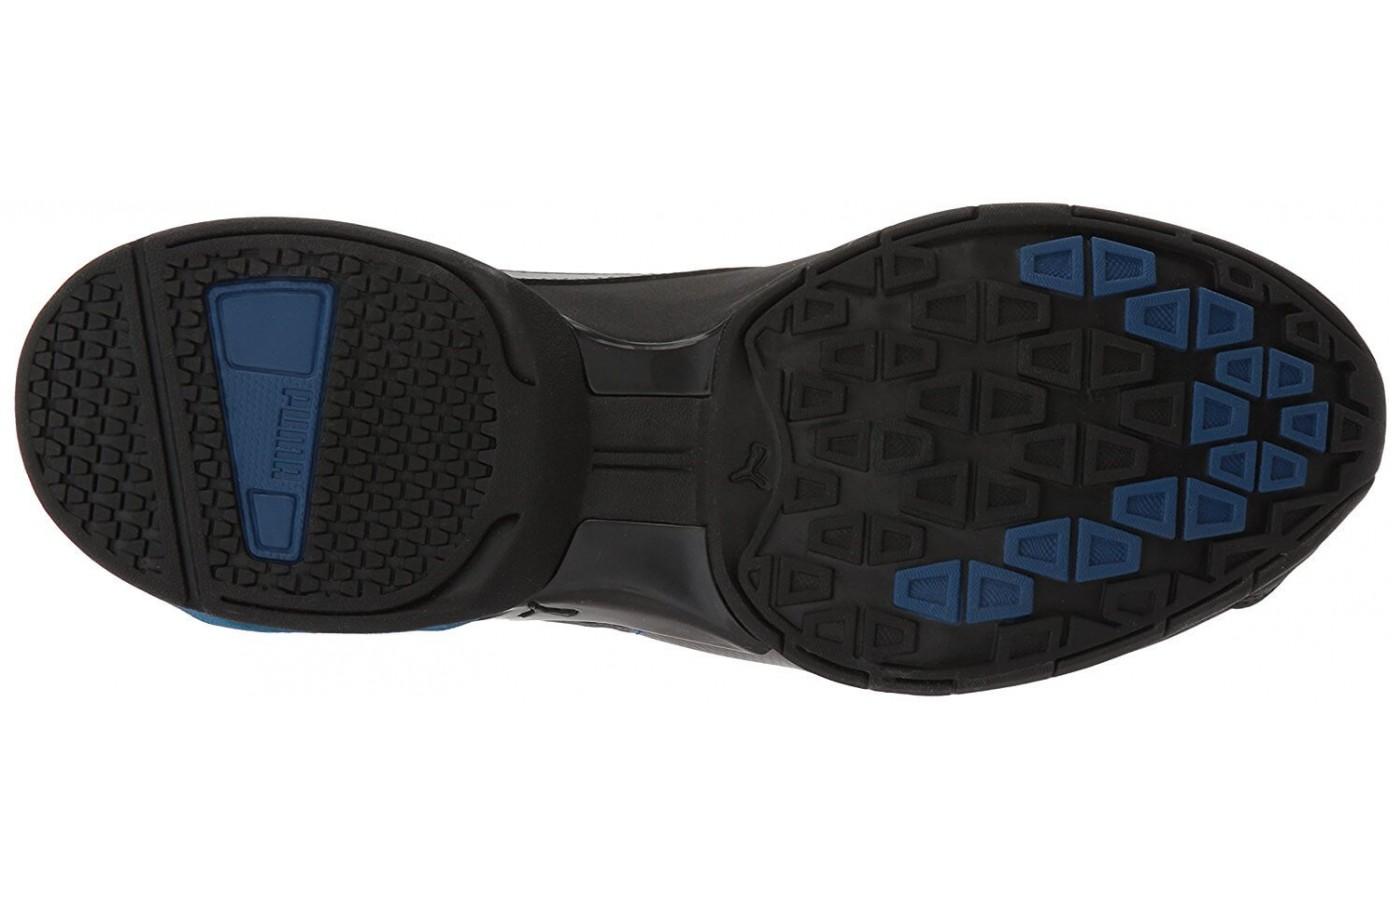 The special rubber outsole provides solid traction and durability